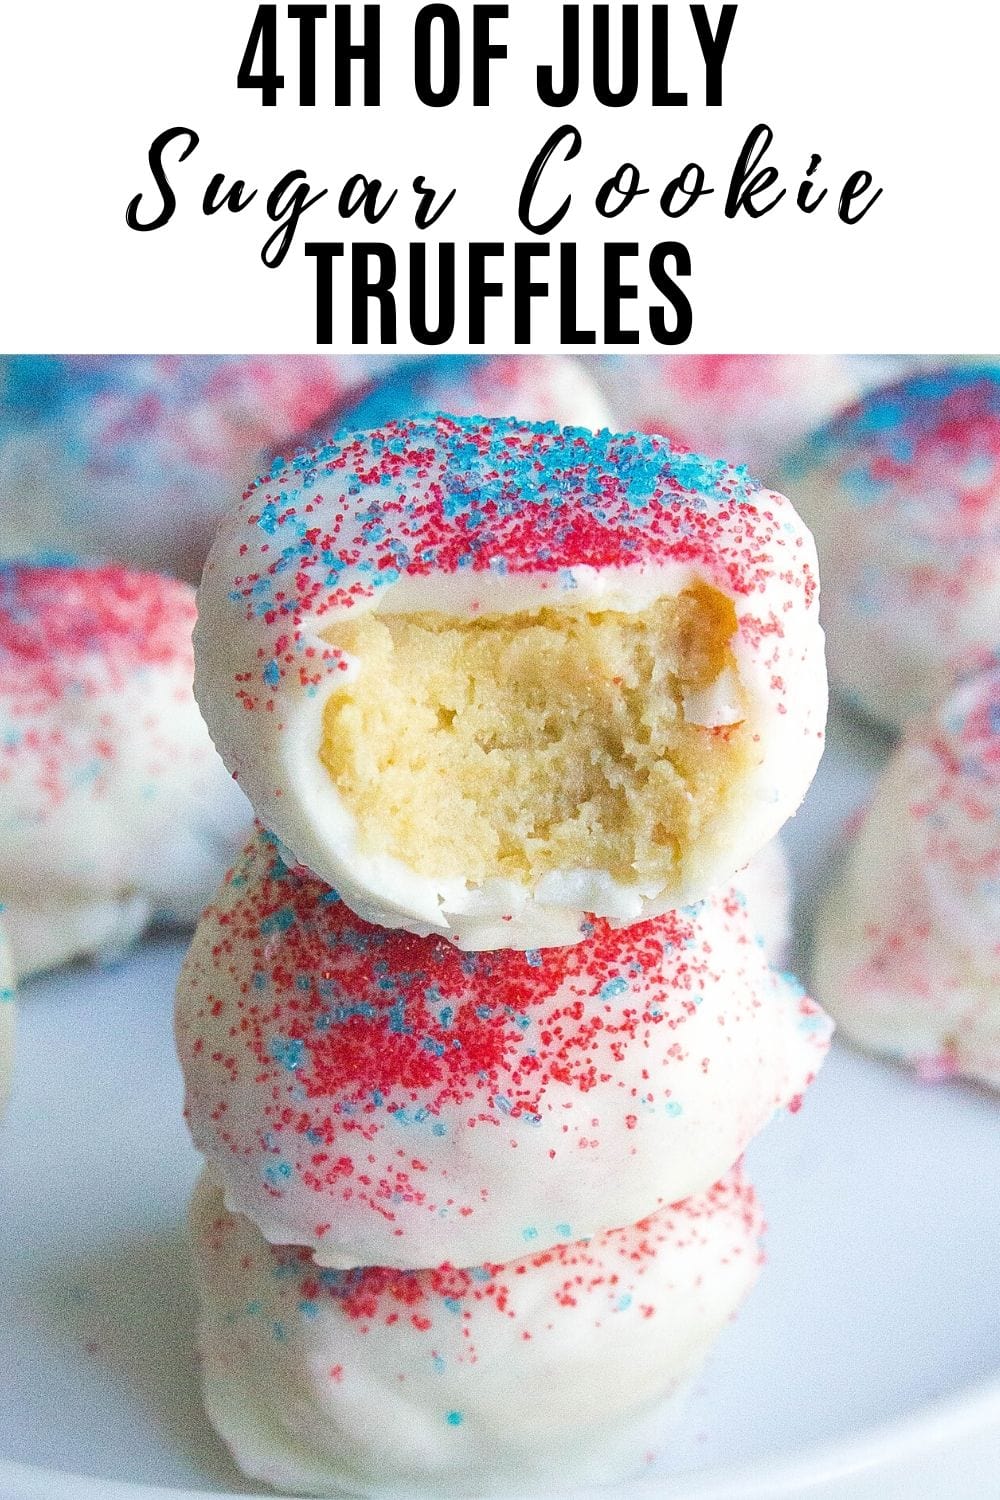 4th of July Sugar Cookie Truffles to pin